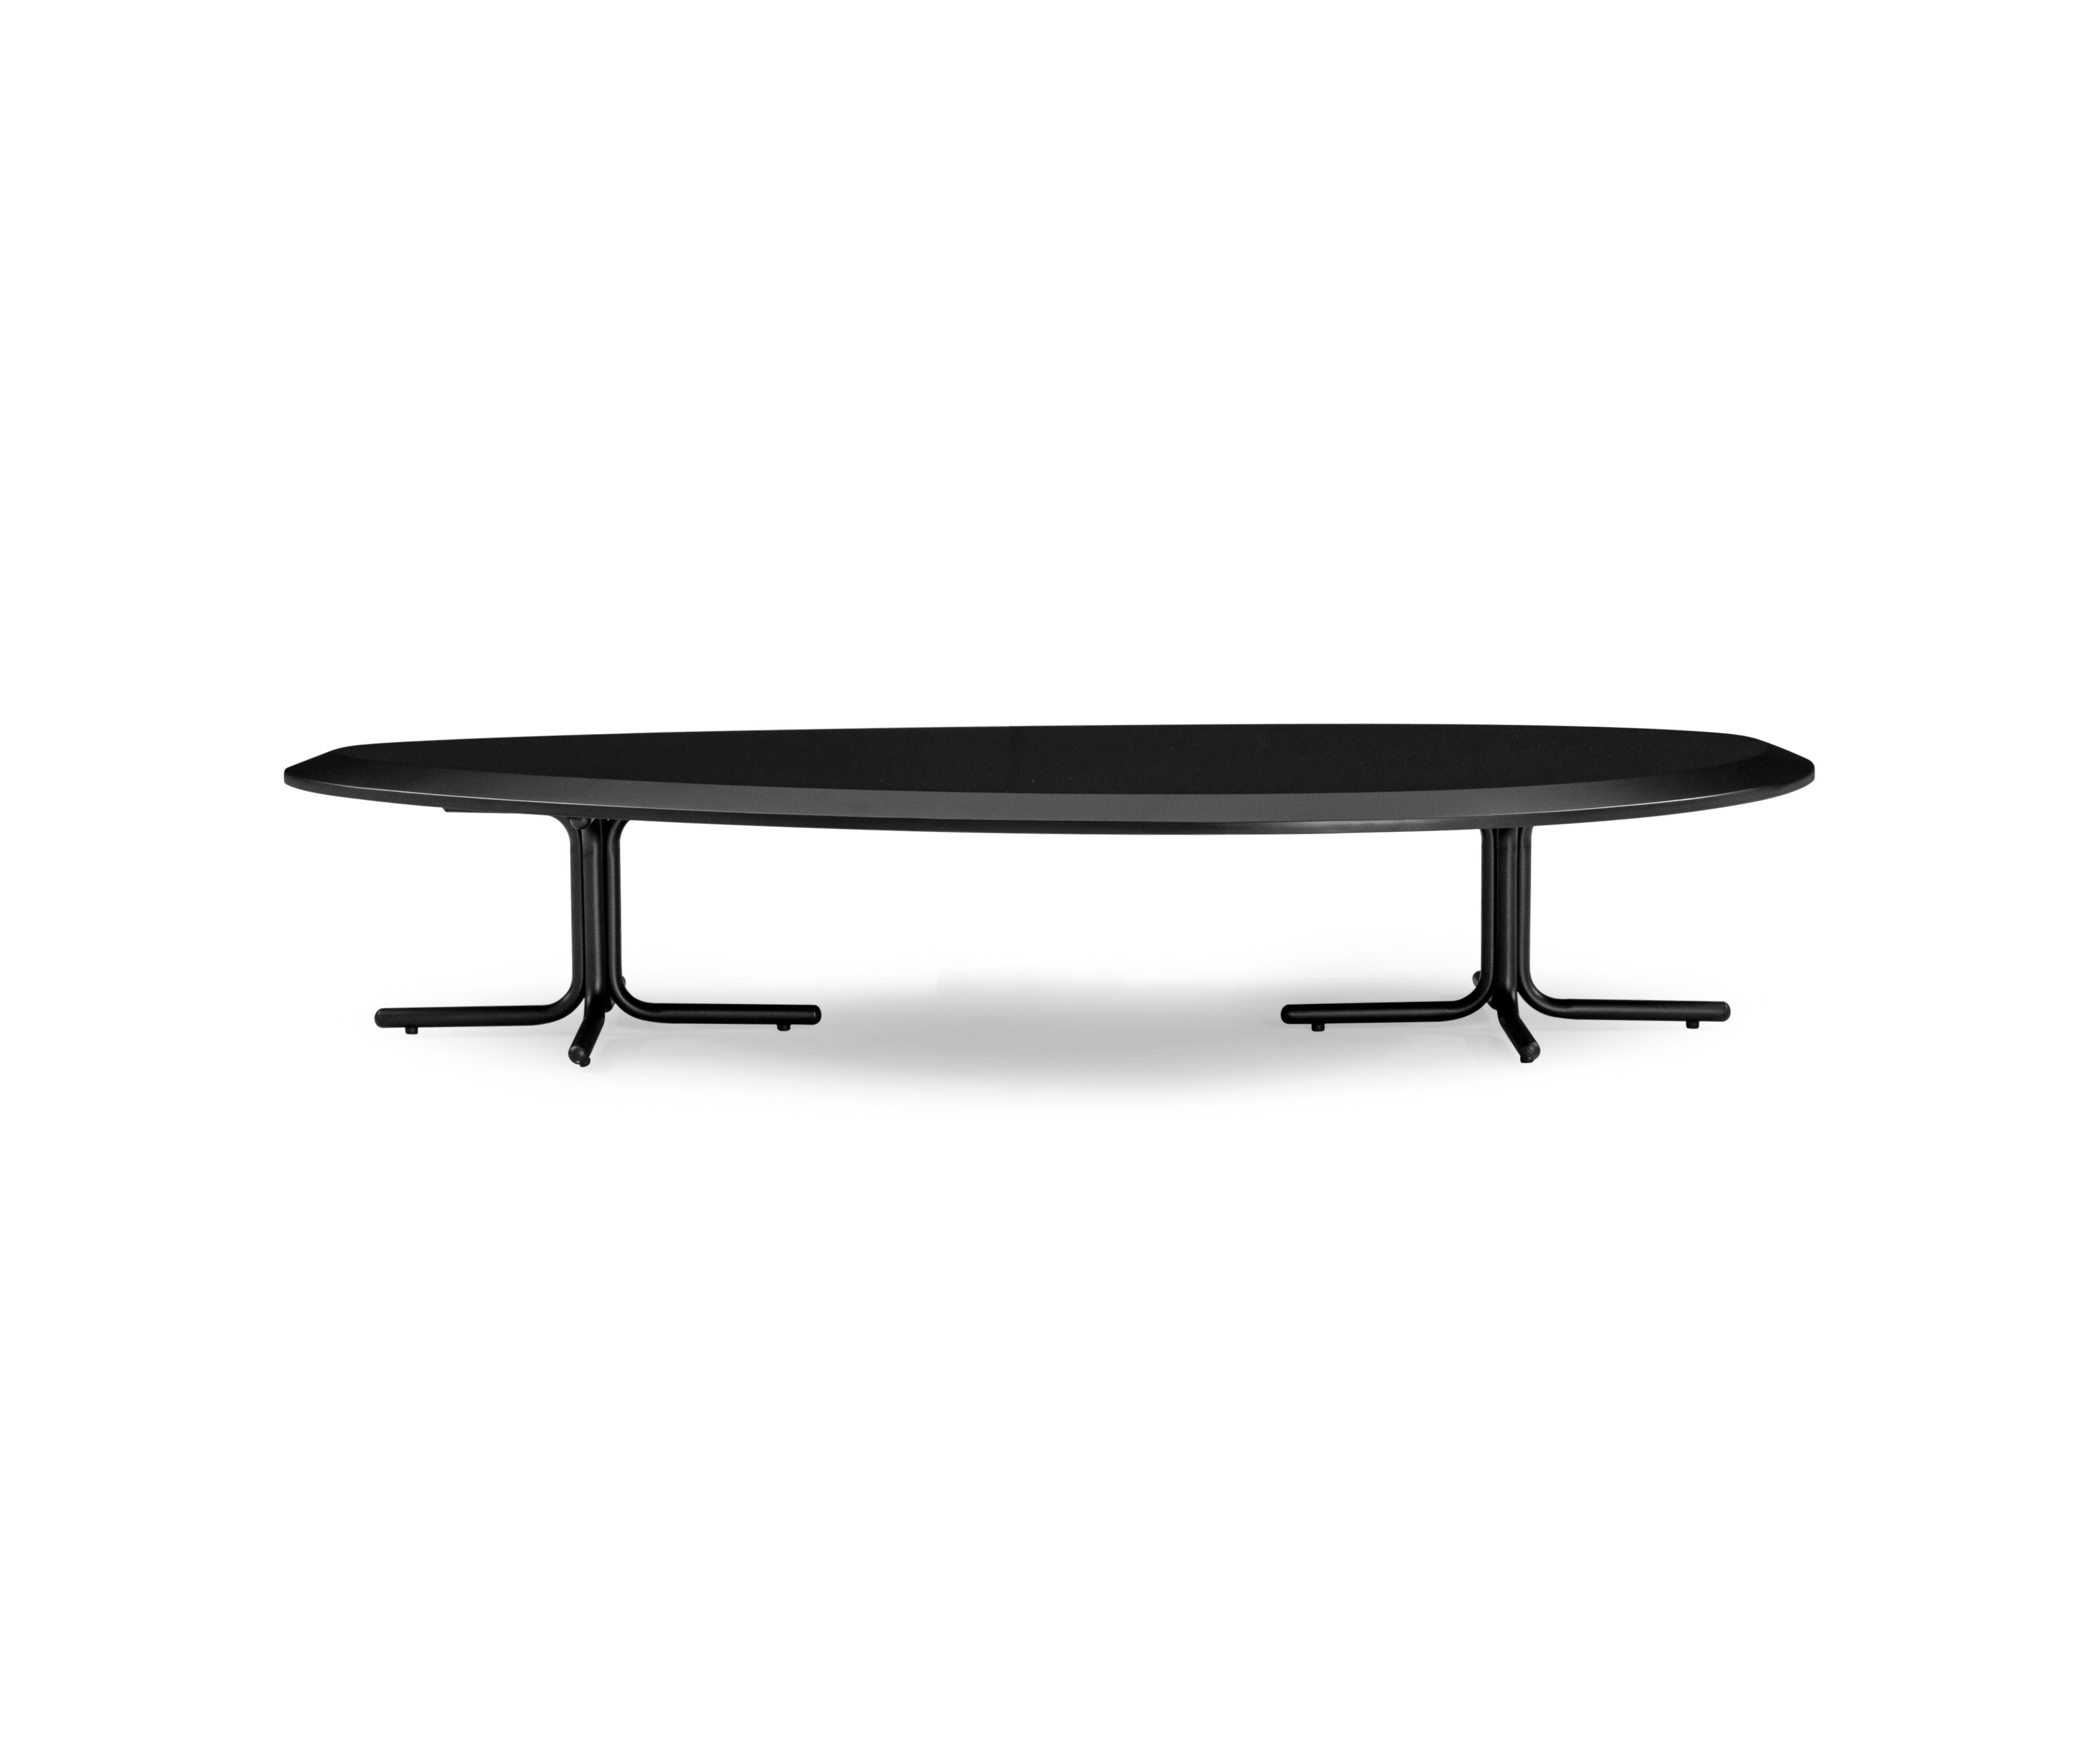 Pante Coffee Table in Black Wood Finish and Black Legs, Set of 4 For Sale 2